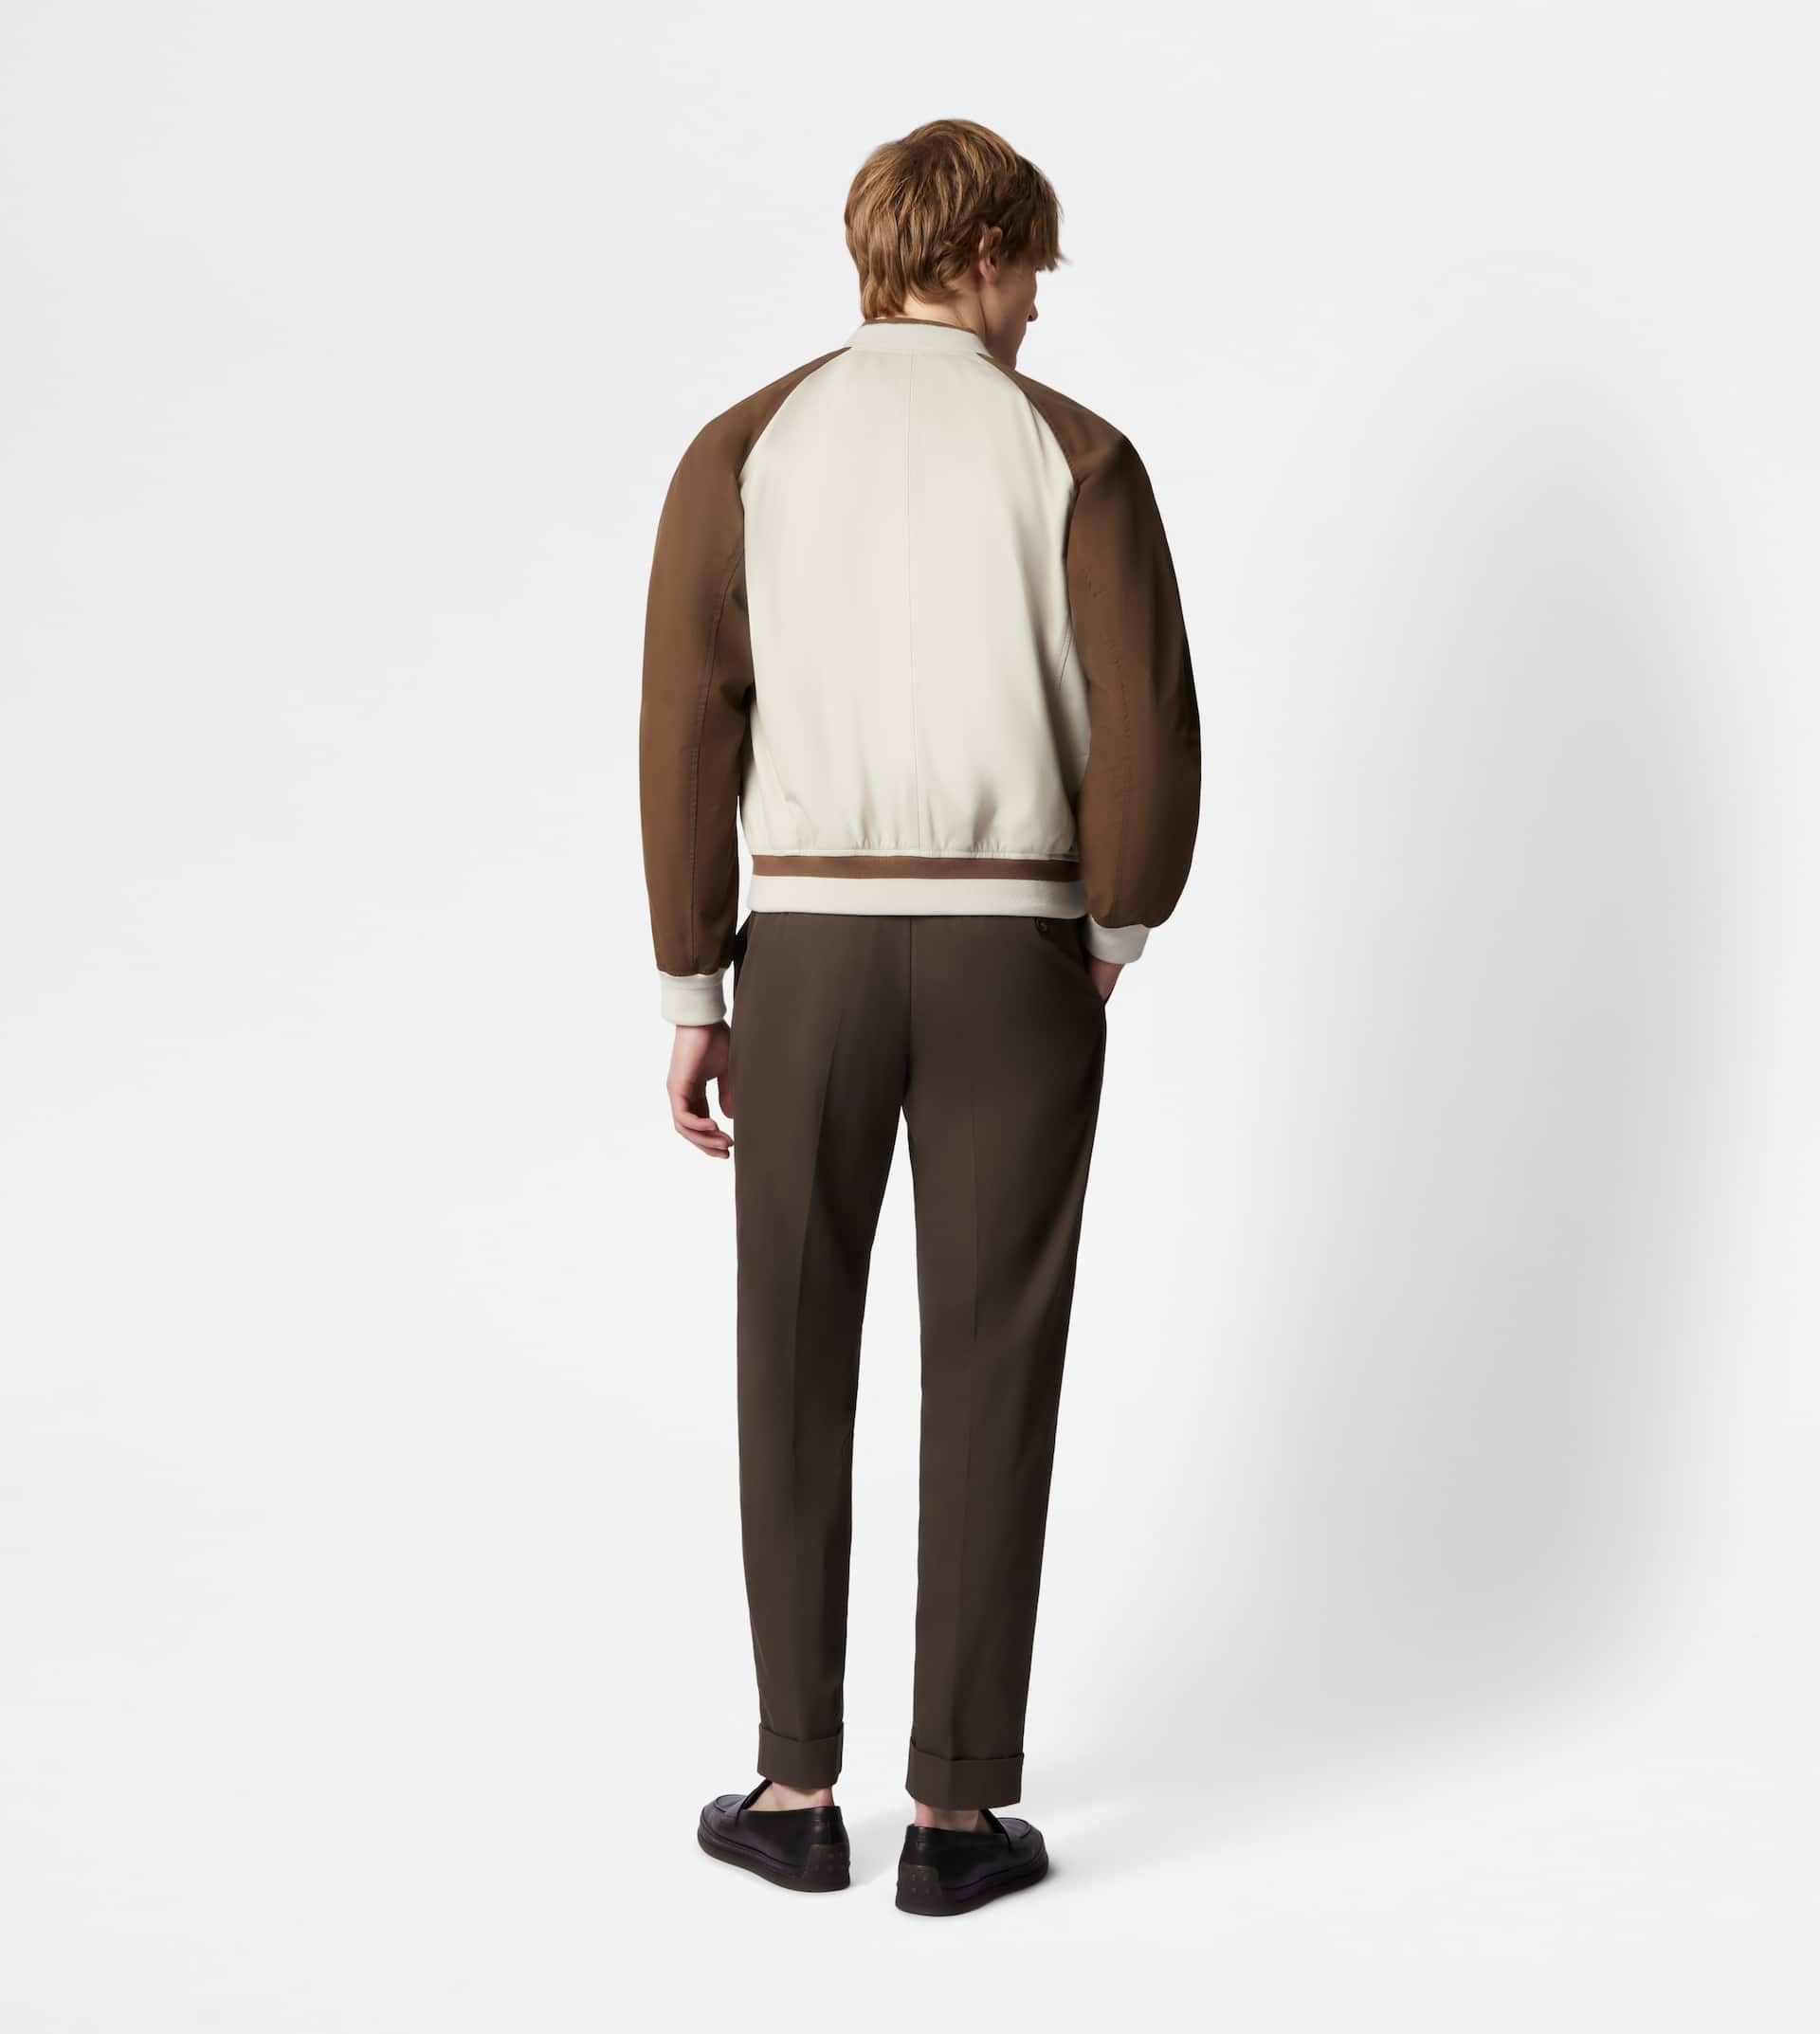 BOMBER JACKET IN LEATHER - BROWN, OFF WHITE - 3